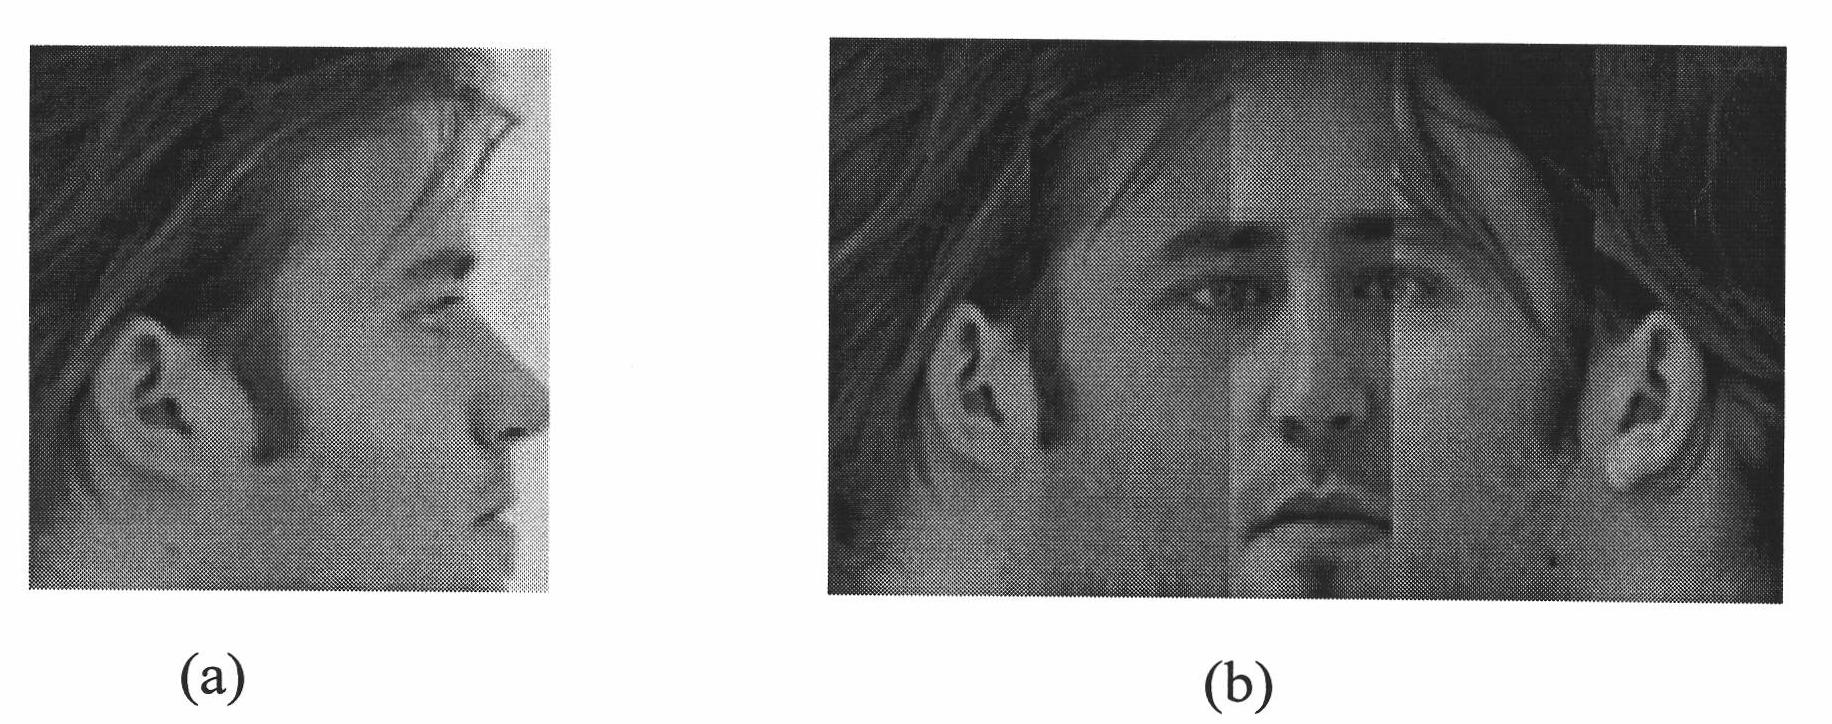 Face recognition method based on combination of partial principal component analysis (PCA) and attitude estimation